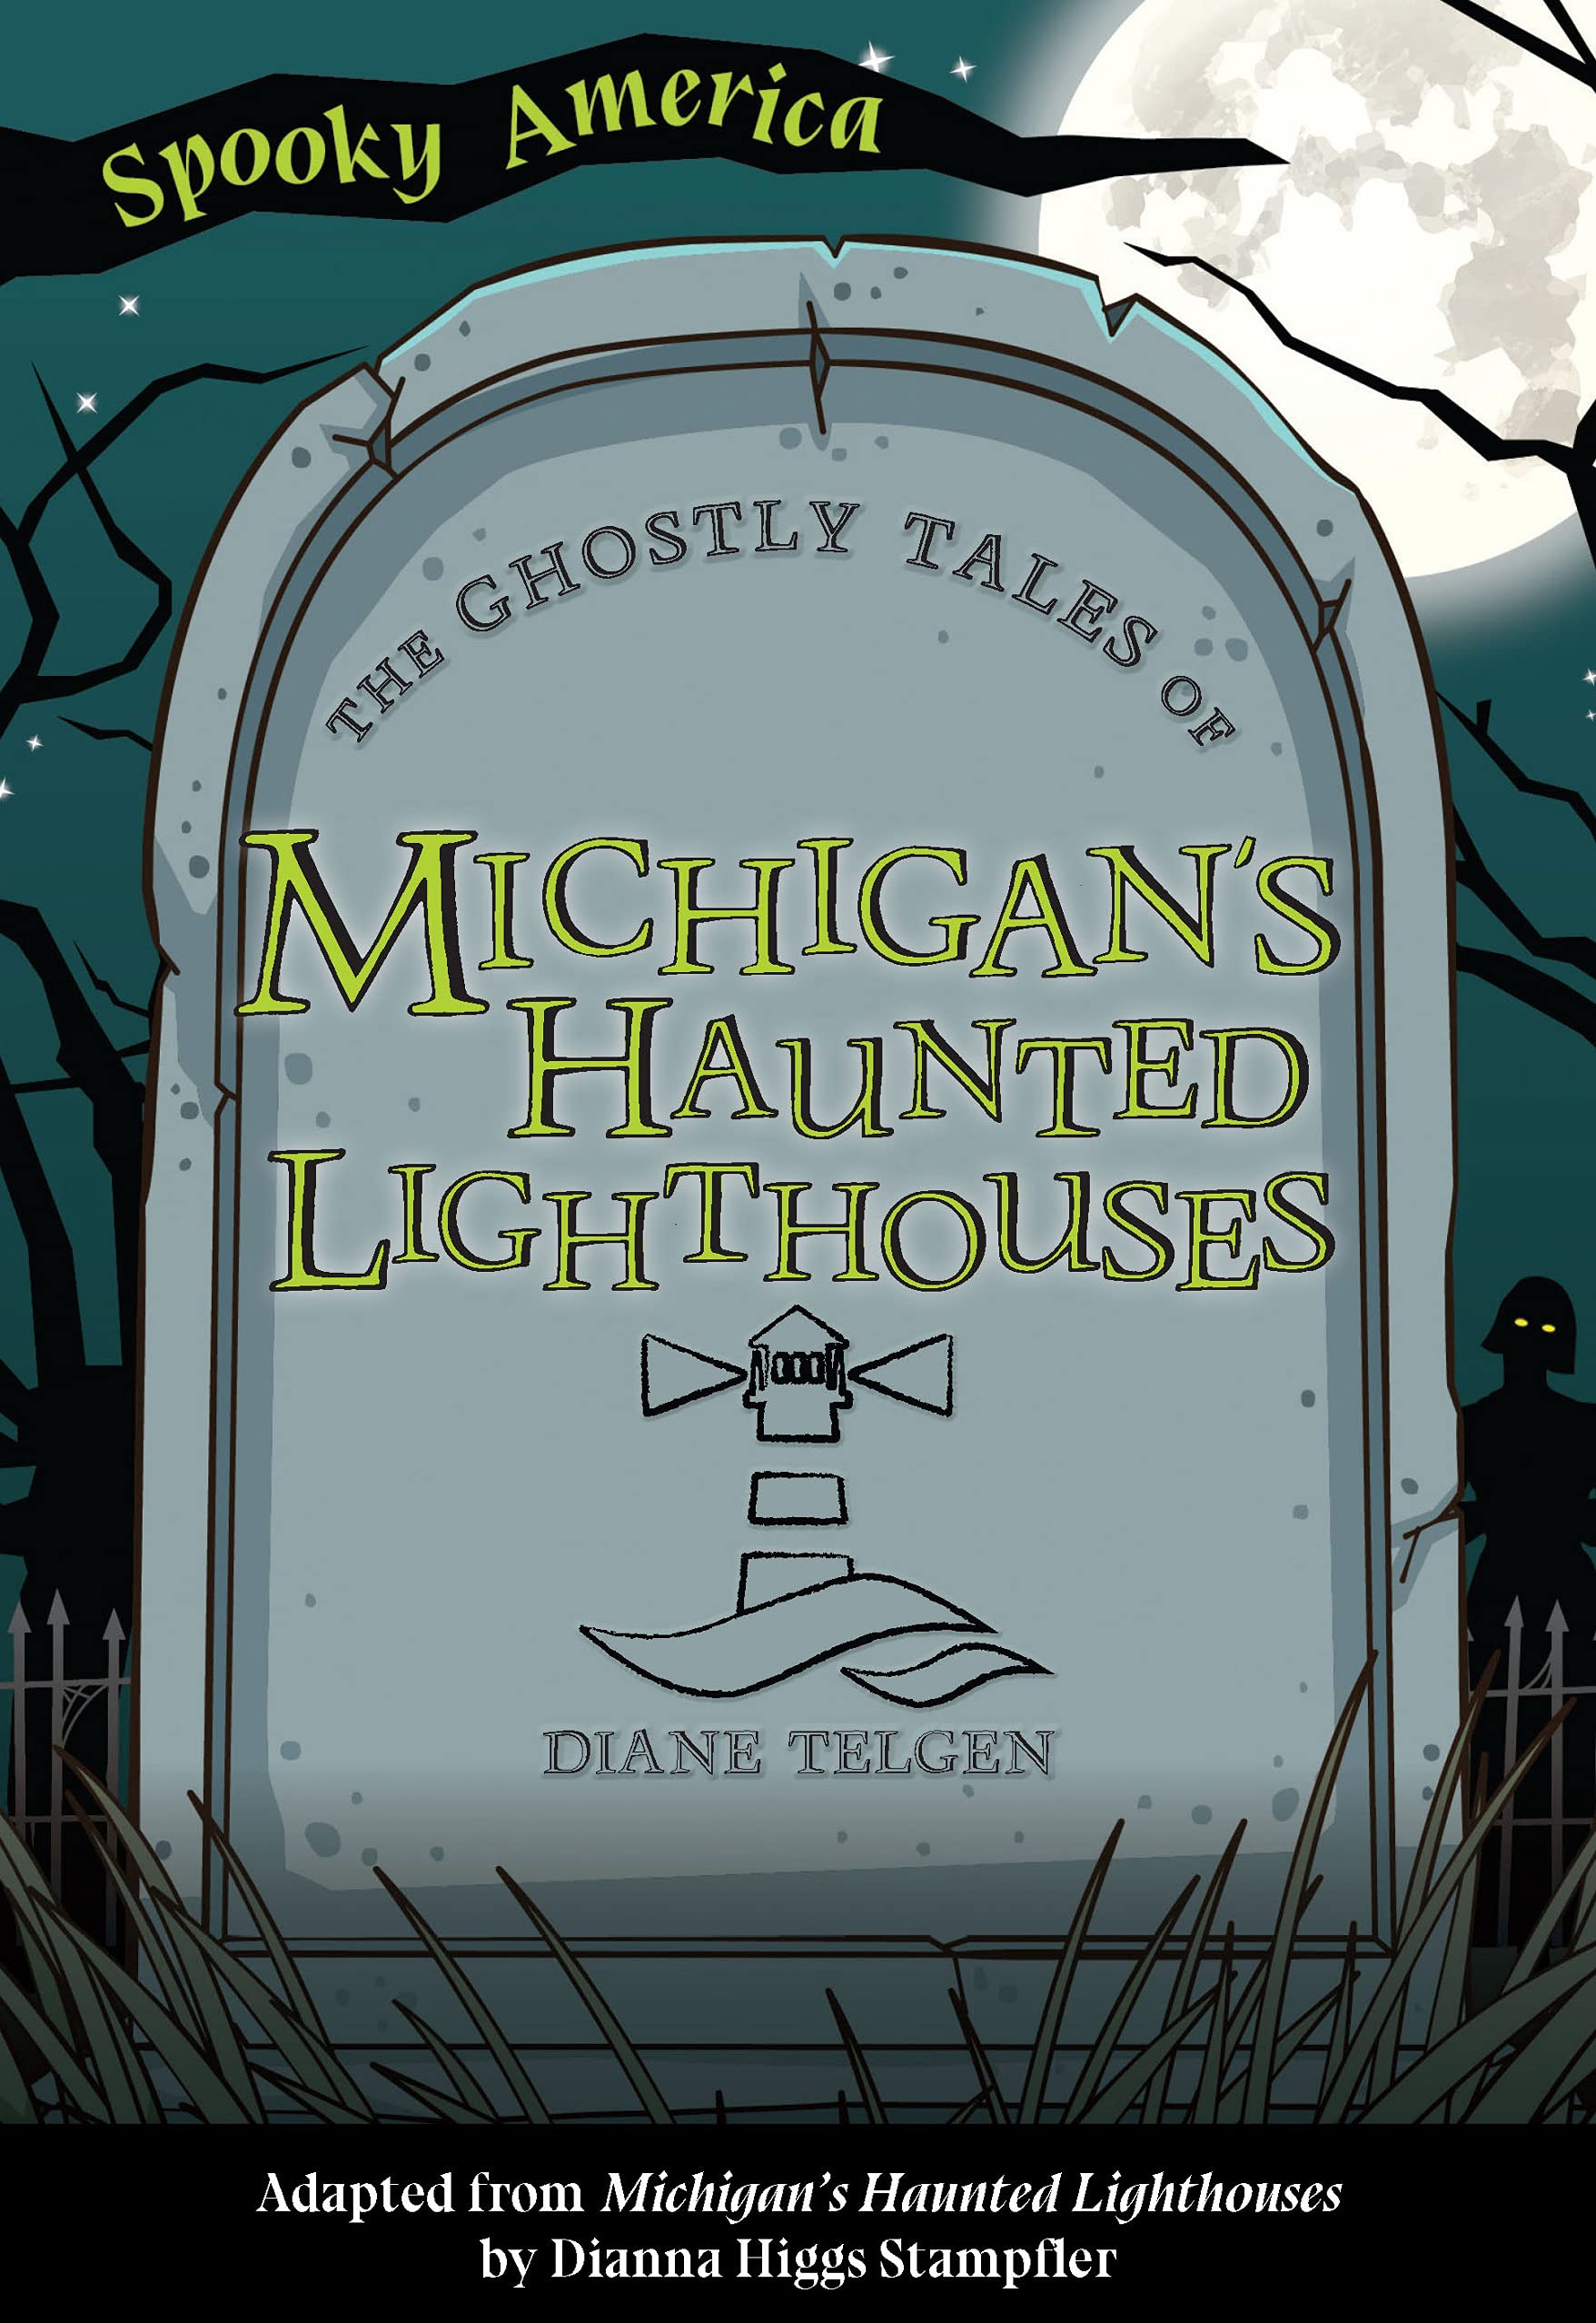 Image for "The Ghostly Tales of Michigan's Haunted Lighthouses"